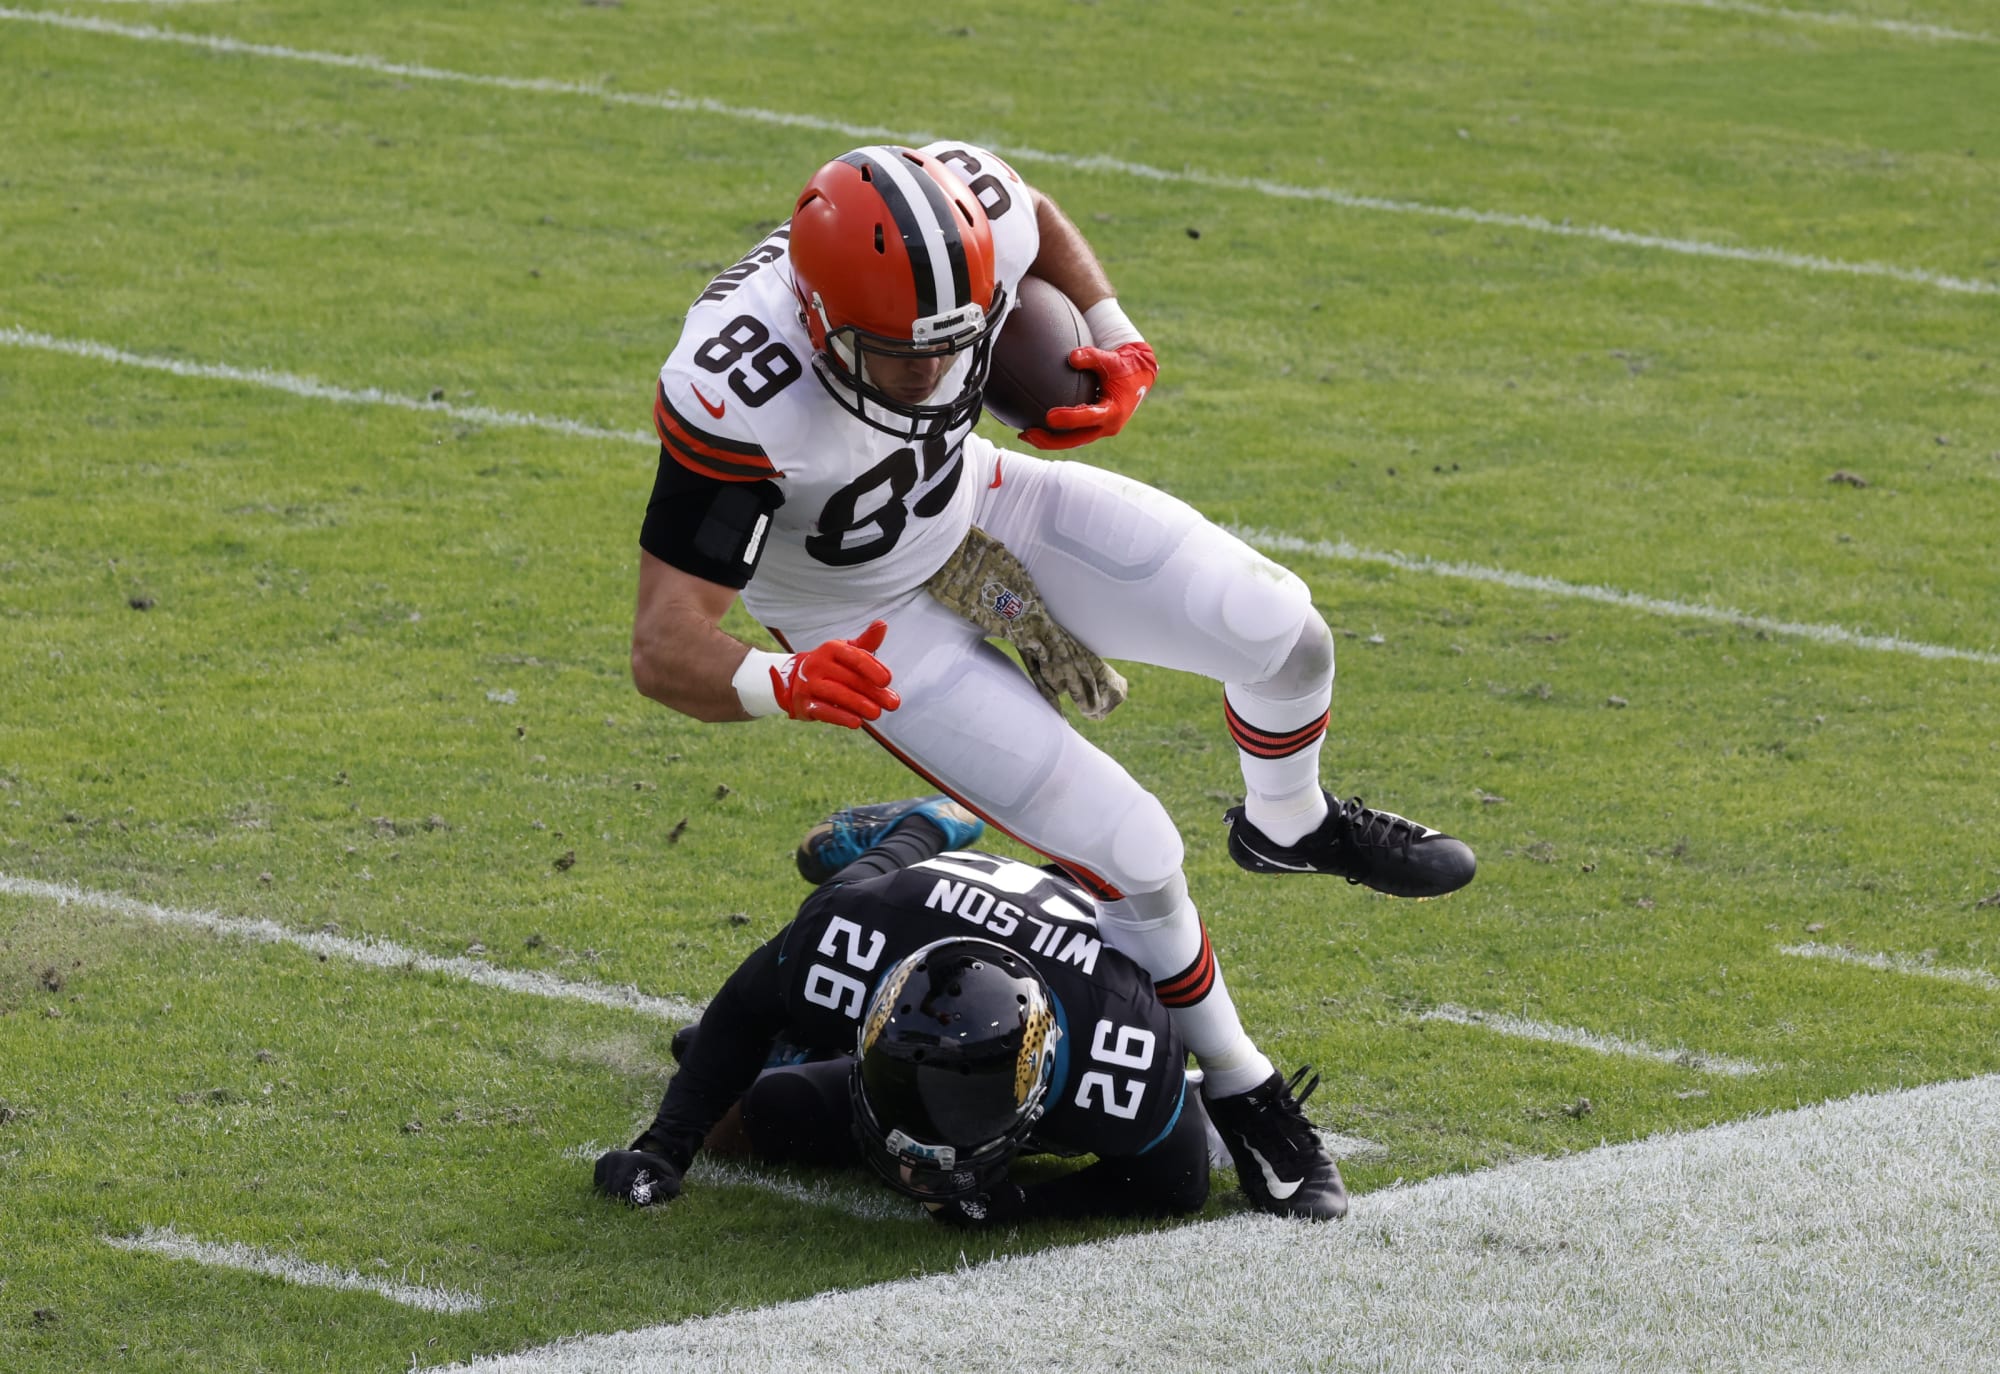 Two Cleveland Browns players experience preseason accidents